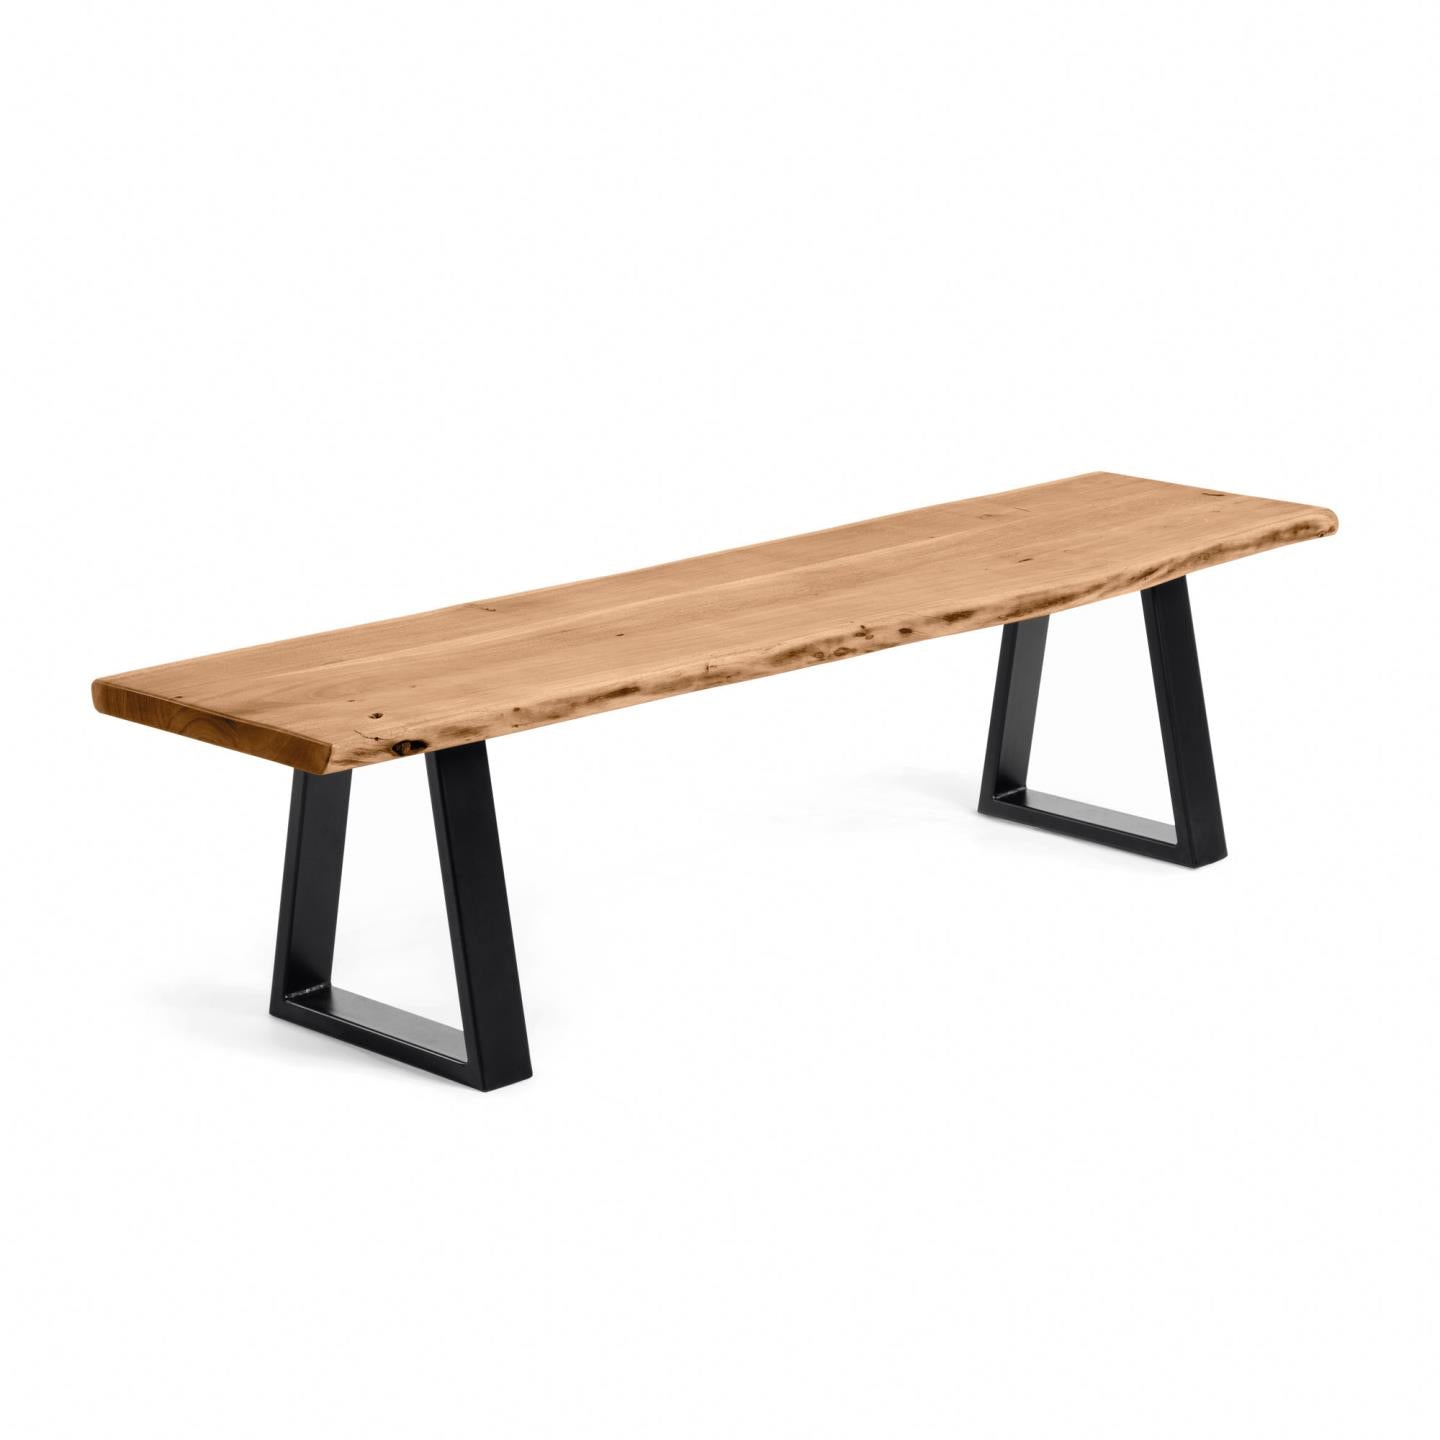 Alaia bench in solid acacia wood with black steel legs, 160 cm